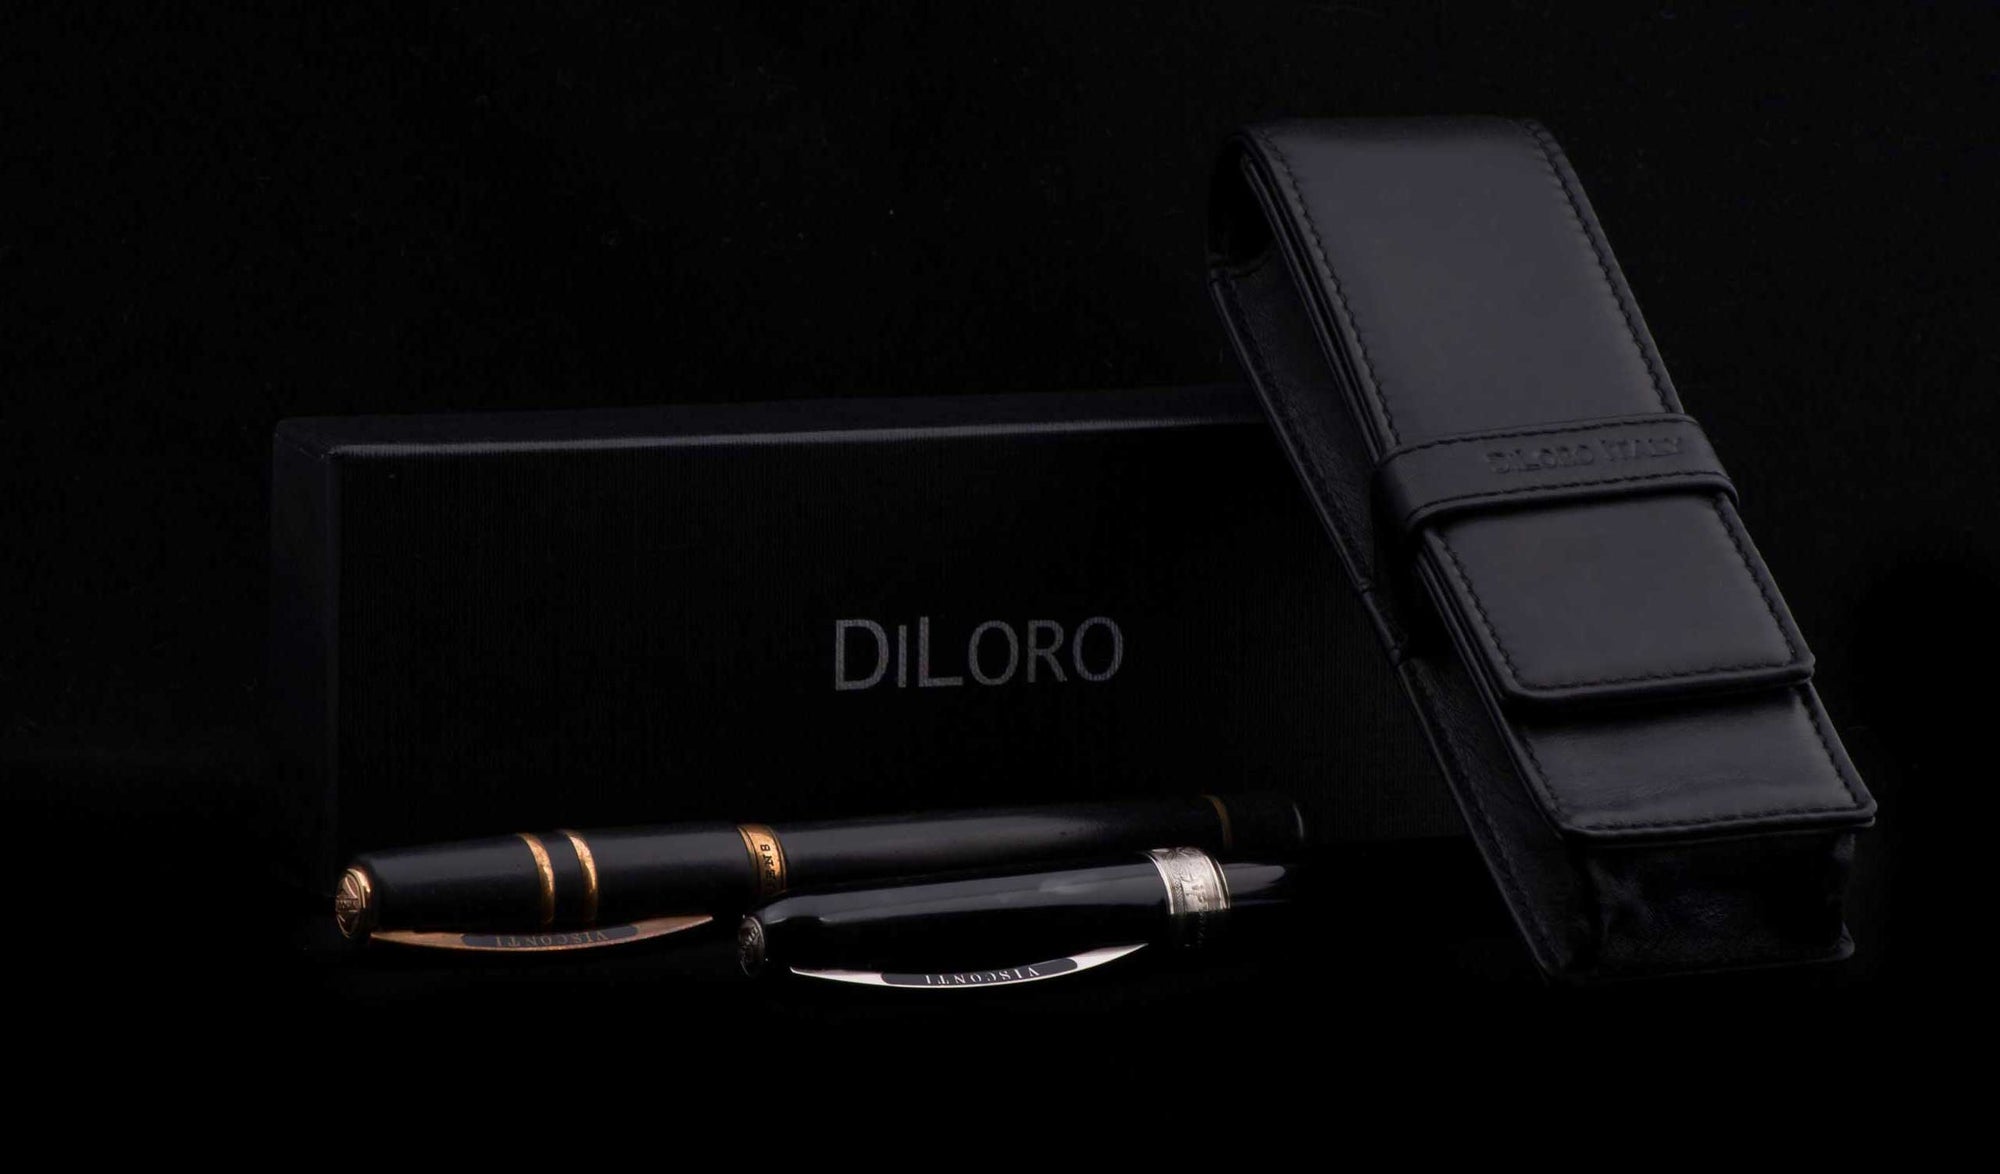 DiLoro Double Pen Case Holder in Top Quality, Full Grain Nappa Leather - Black, Dark Brown with old logo (pens not included)